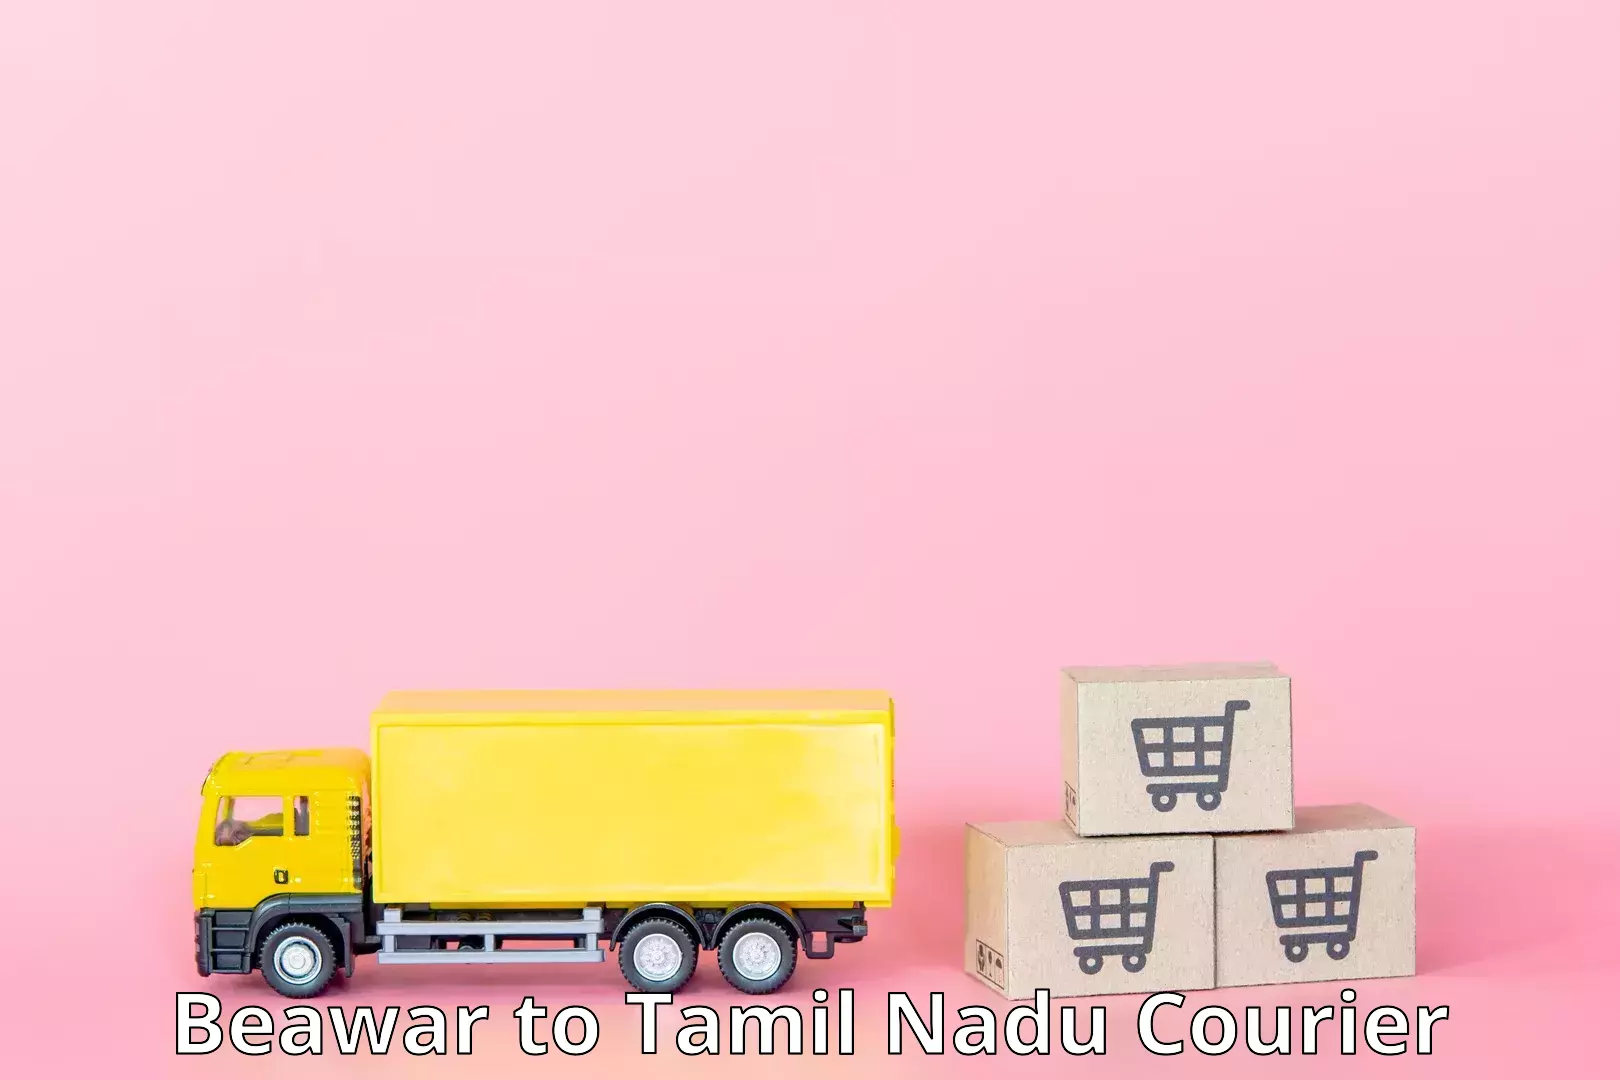 Nationwide parcel services Beawar to Ennore Port Chennai